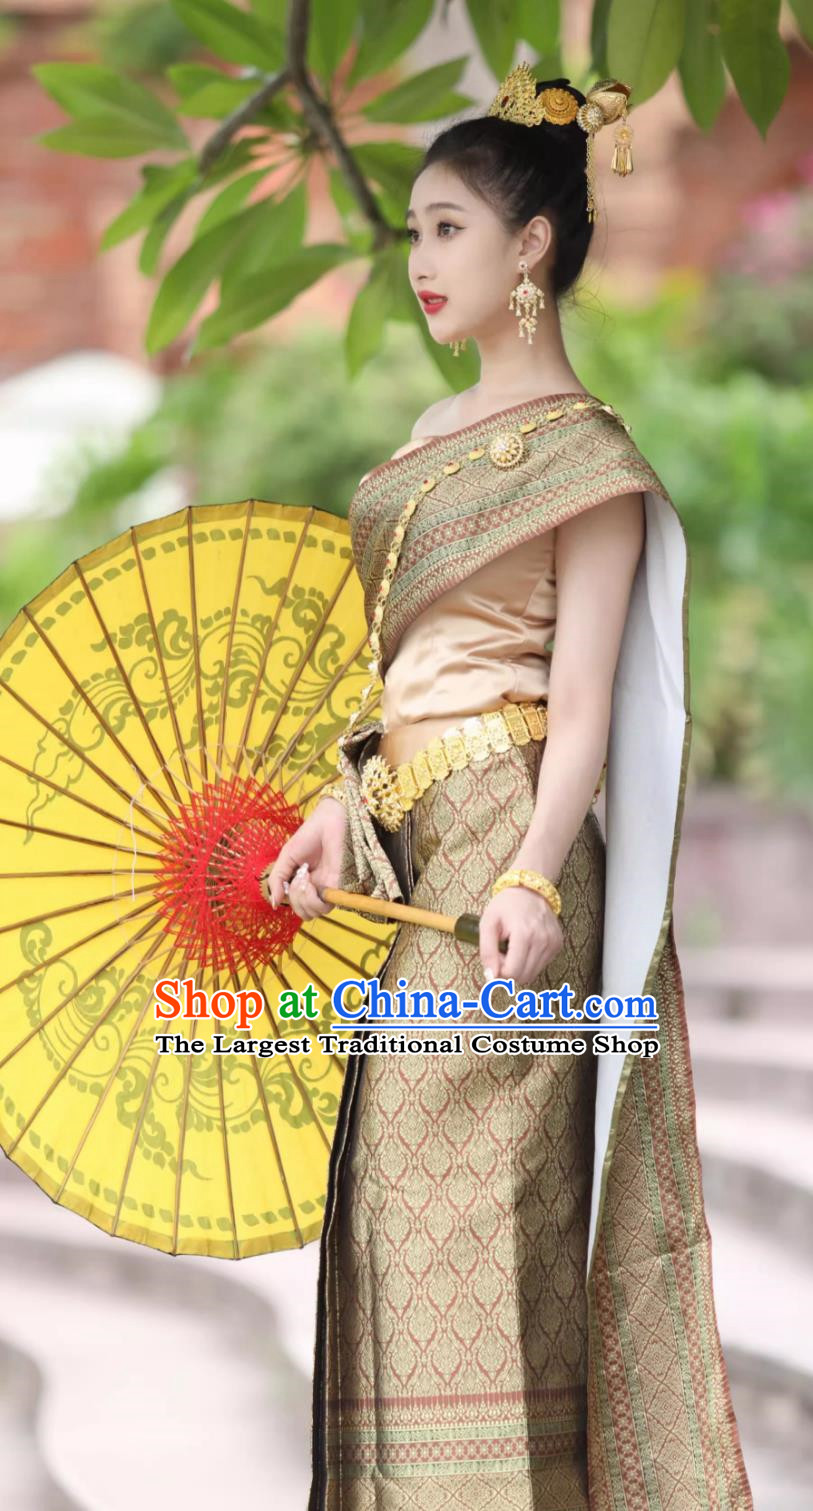 Thai Traditional Clothing Women Set Off Shoulder Thailand Daily Costume Welcome Work Uniform